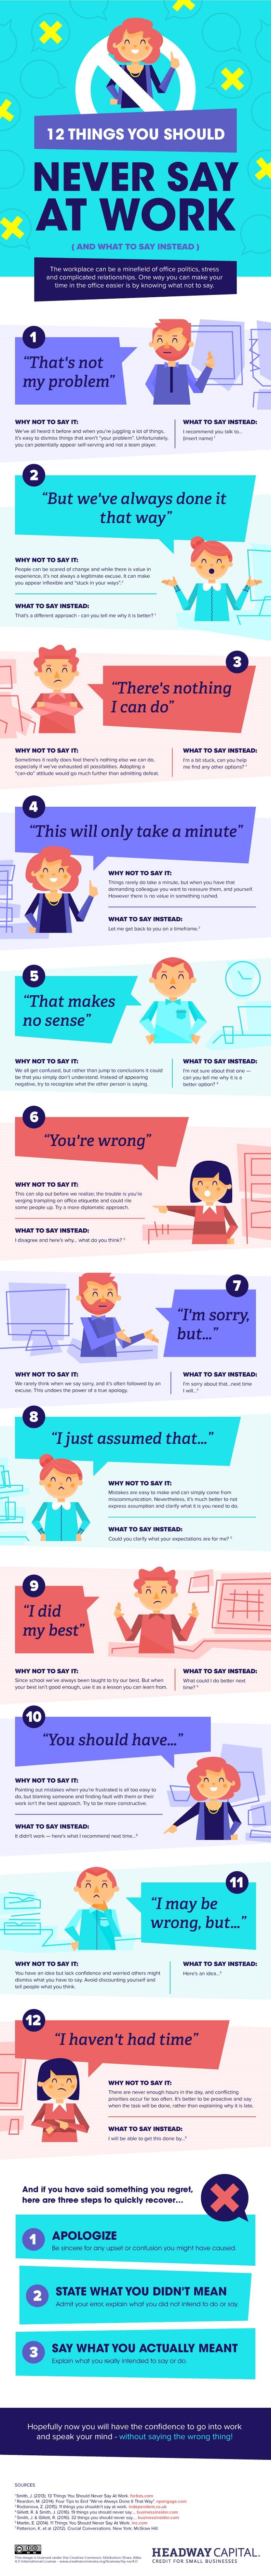 12_never-say-at-work-infographic